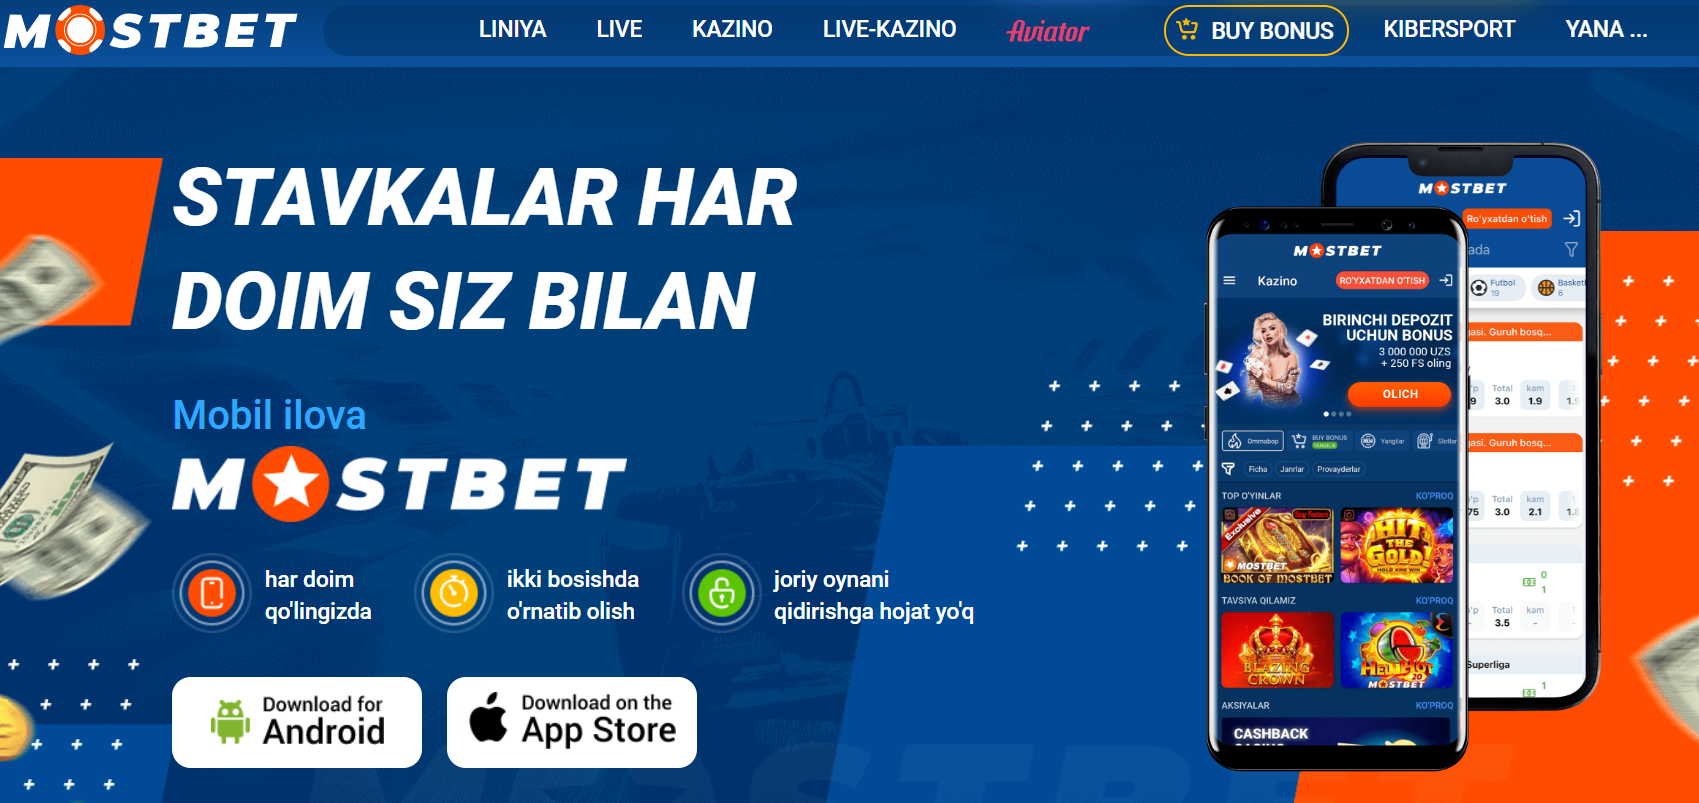 Mostbet Android.APK skachat 